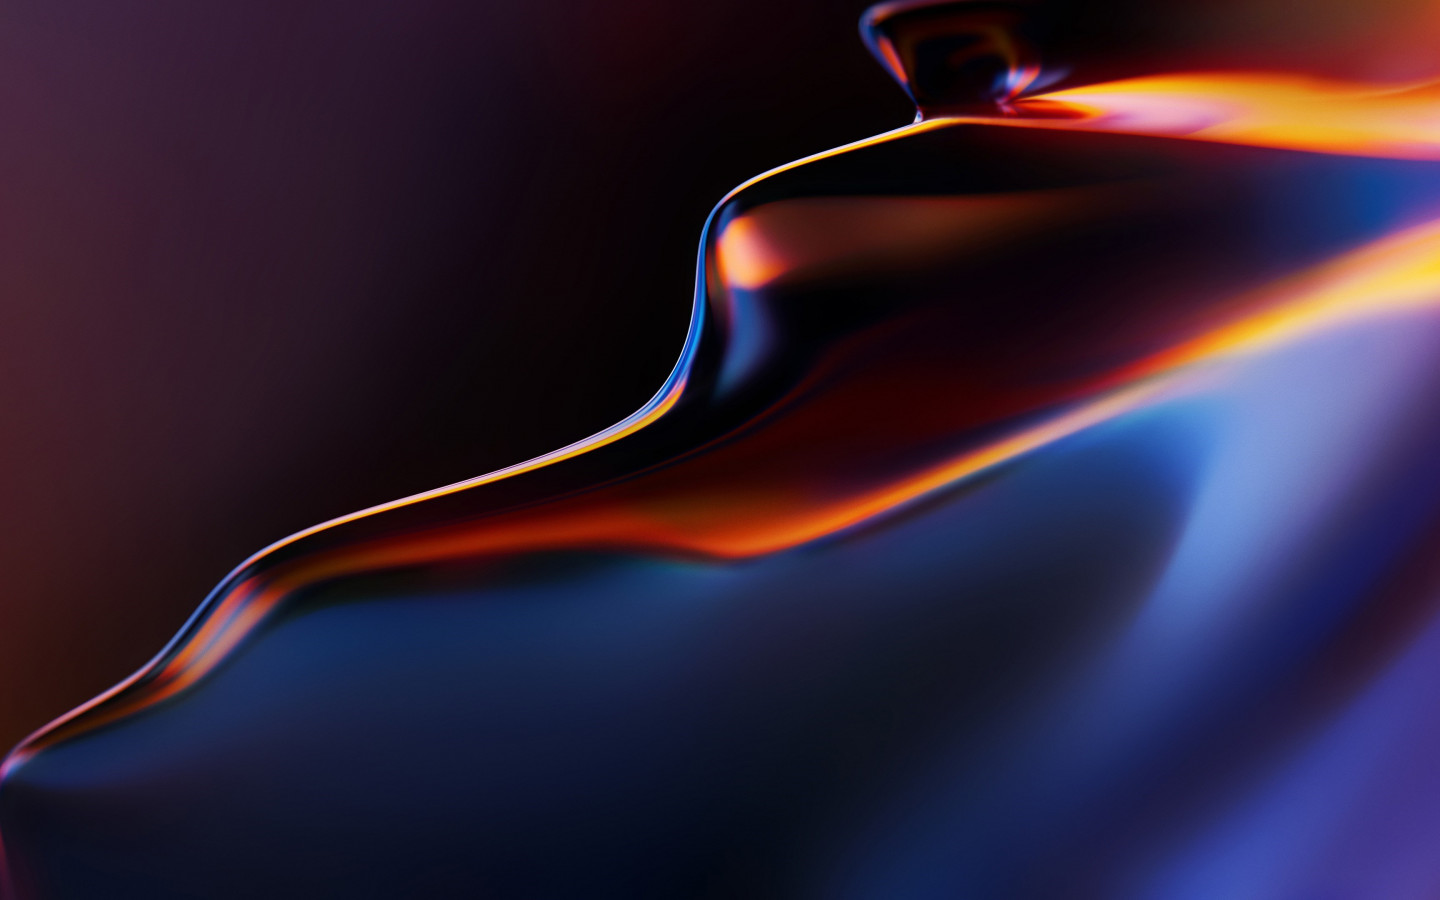 Abstract, flow, OnePlus 6T wallpaper 1440x900